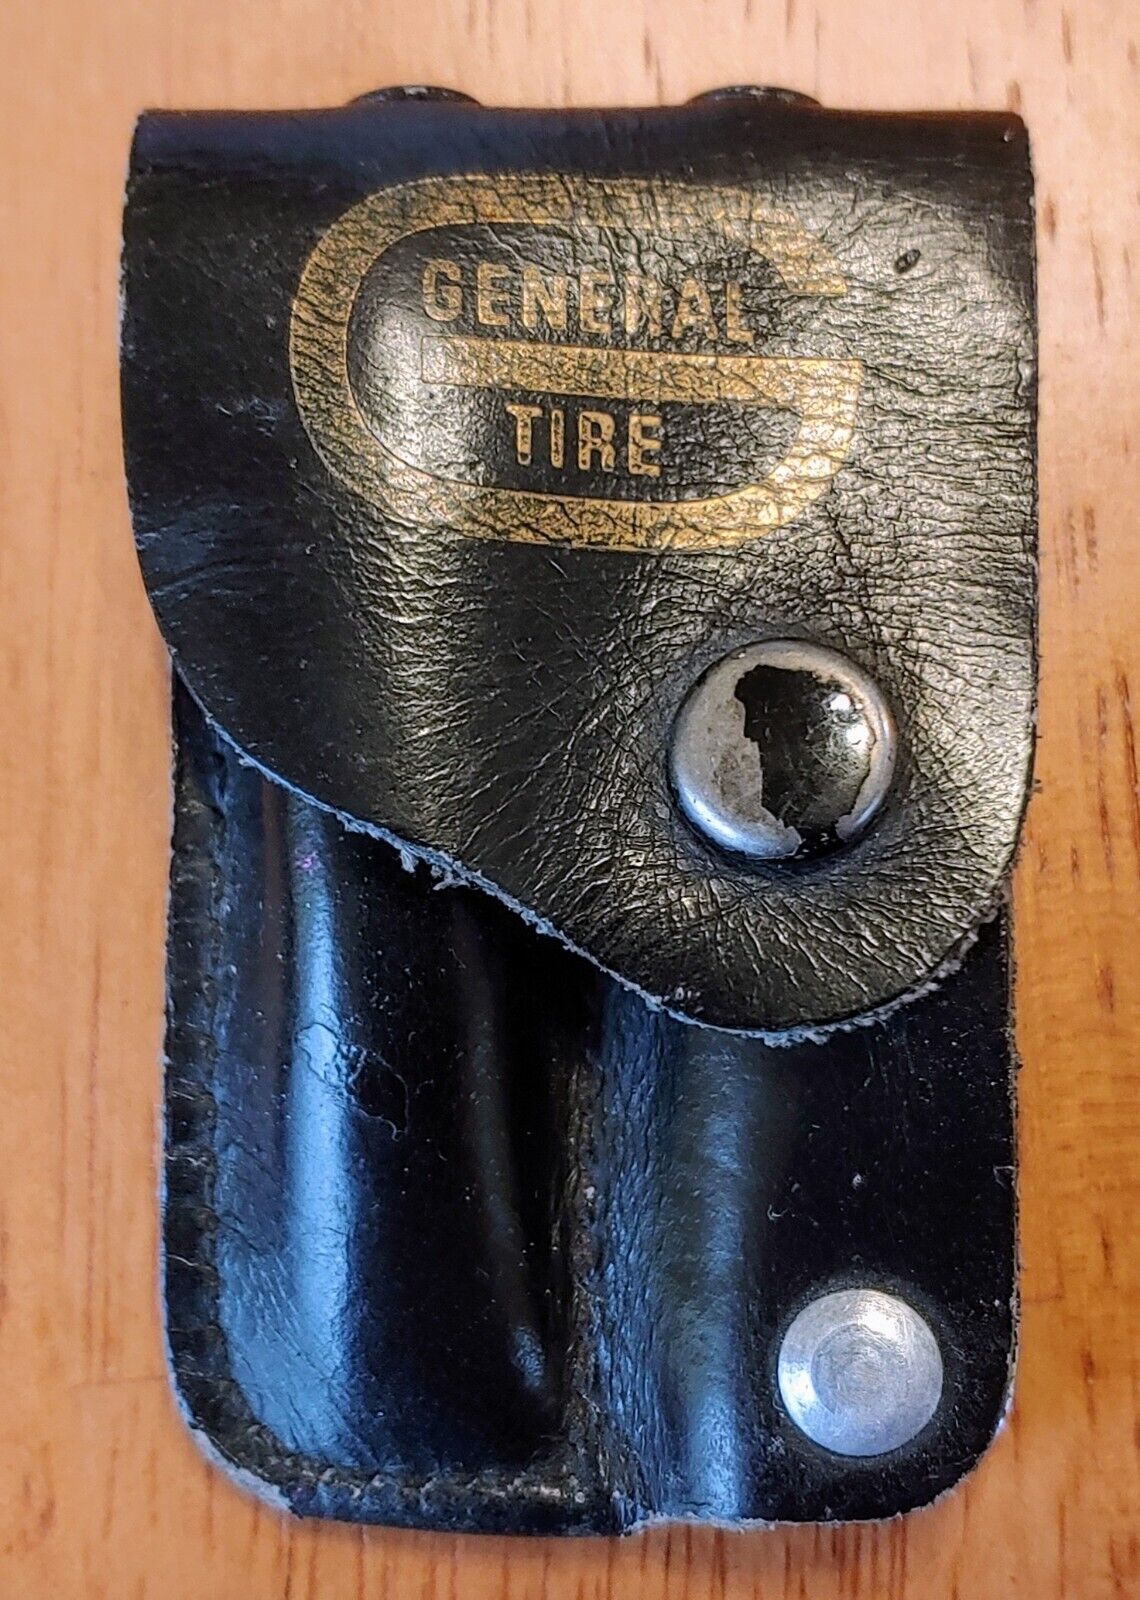 general tire collectible